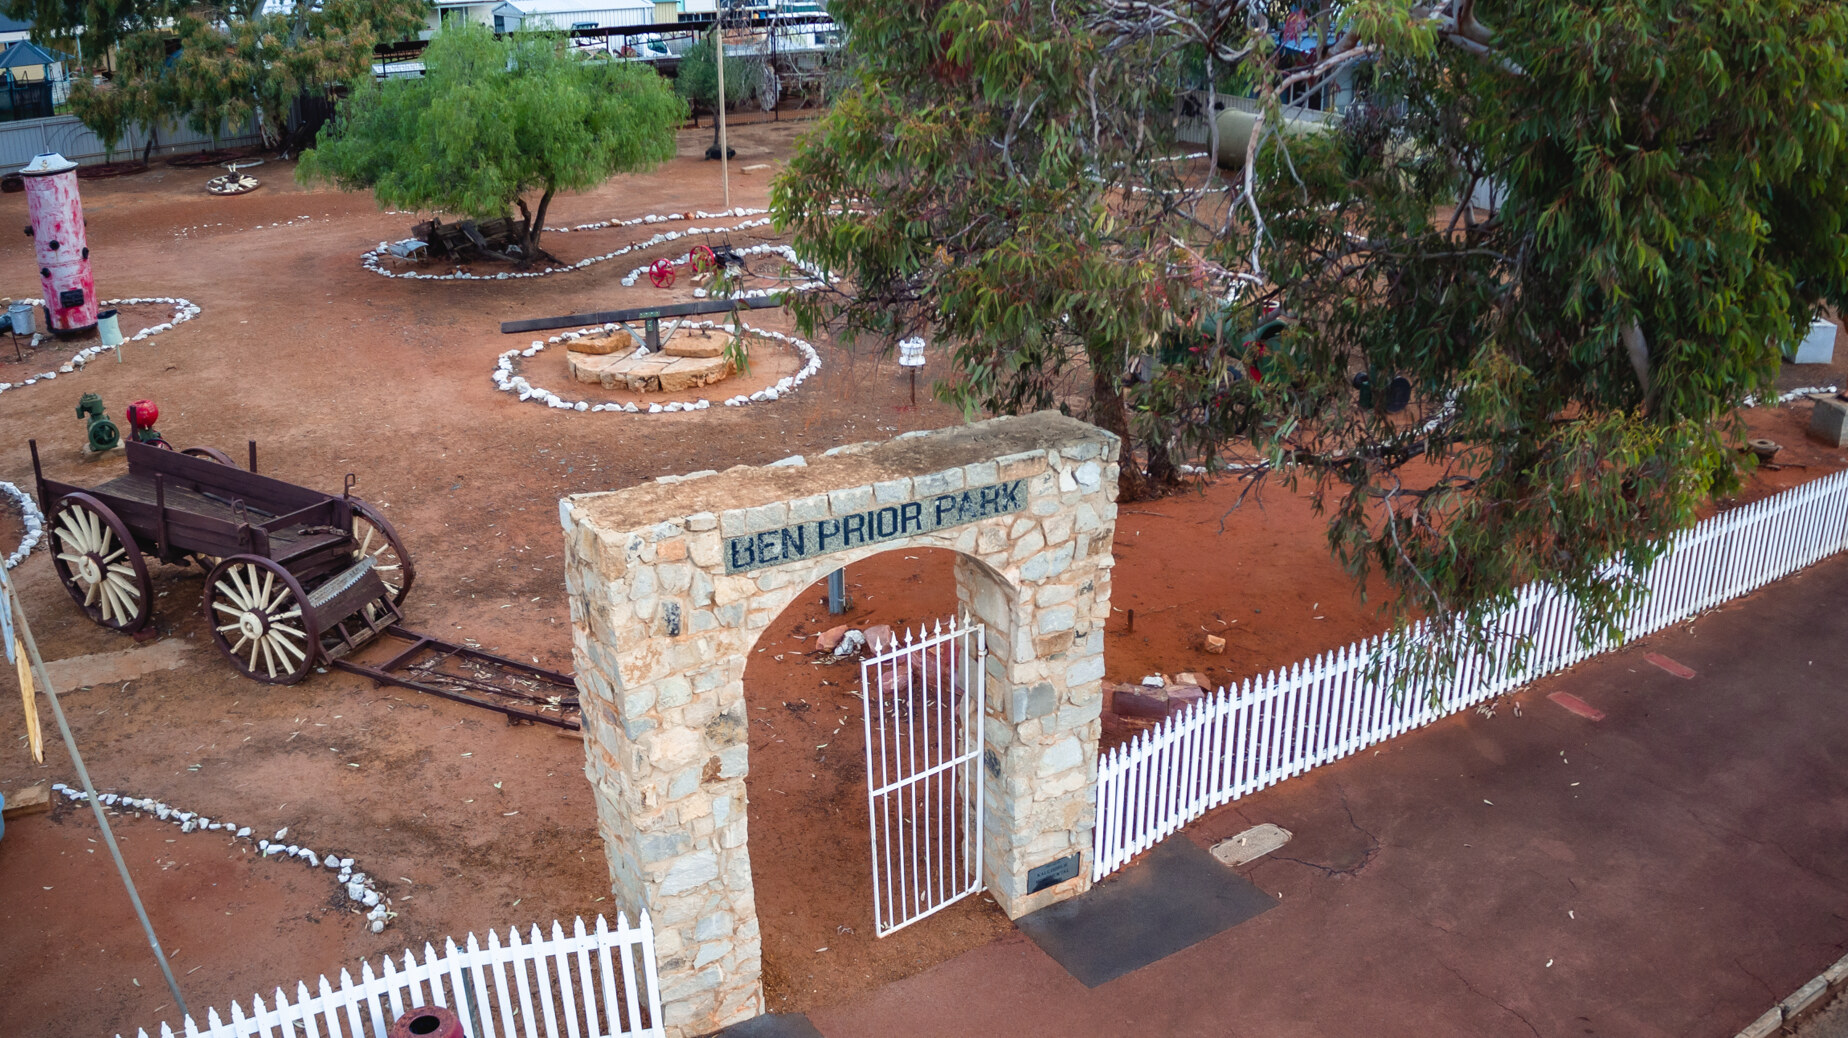 Ben Prior Park in Coolgardie with some of the historic mining equipment shown